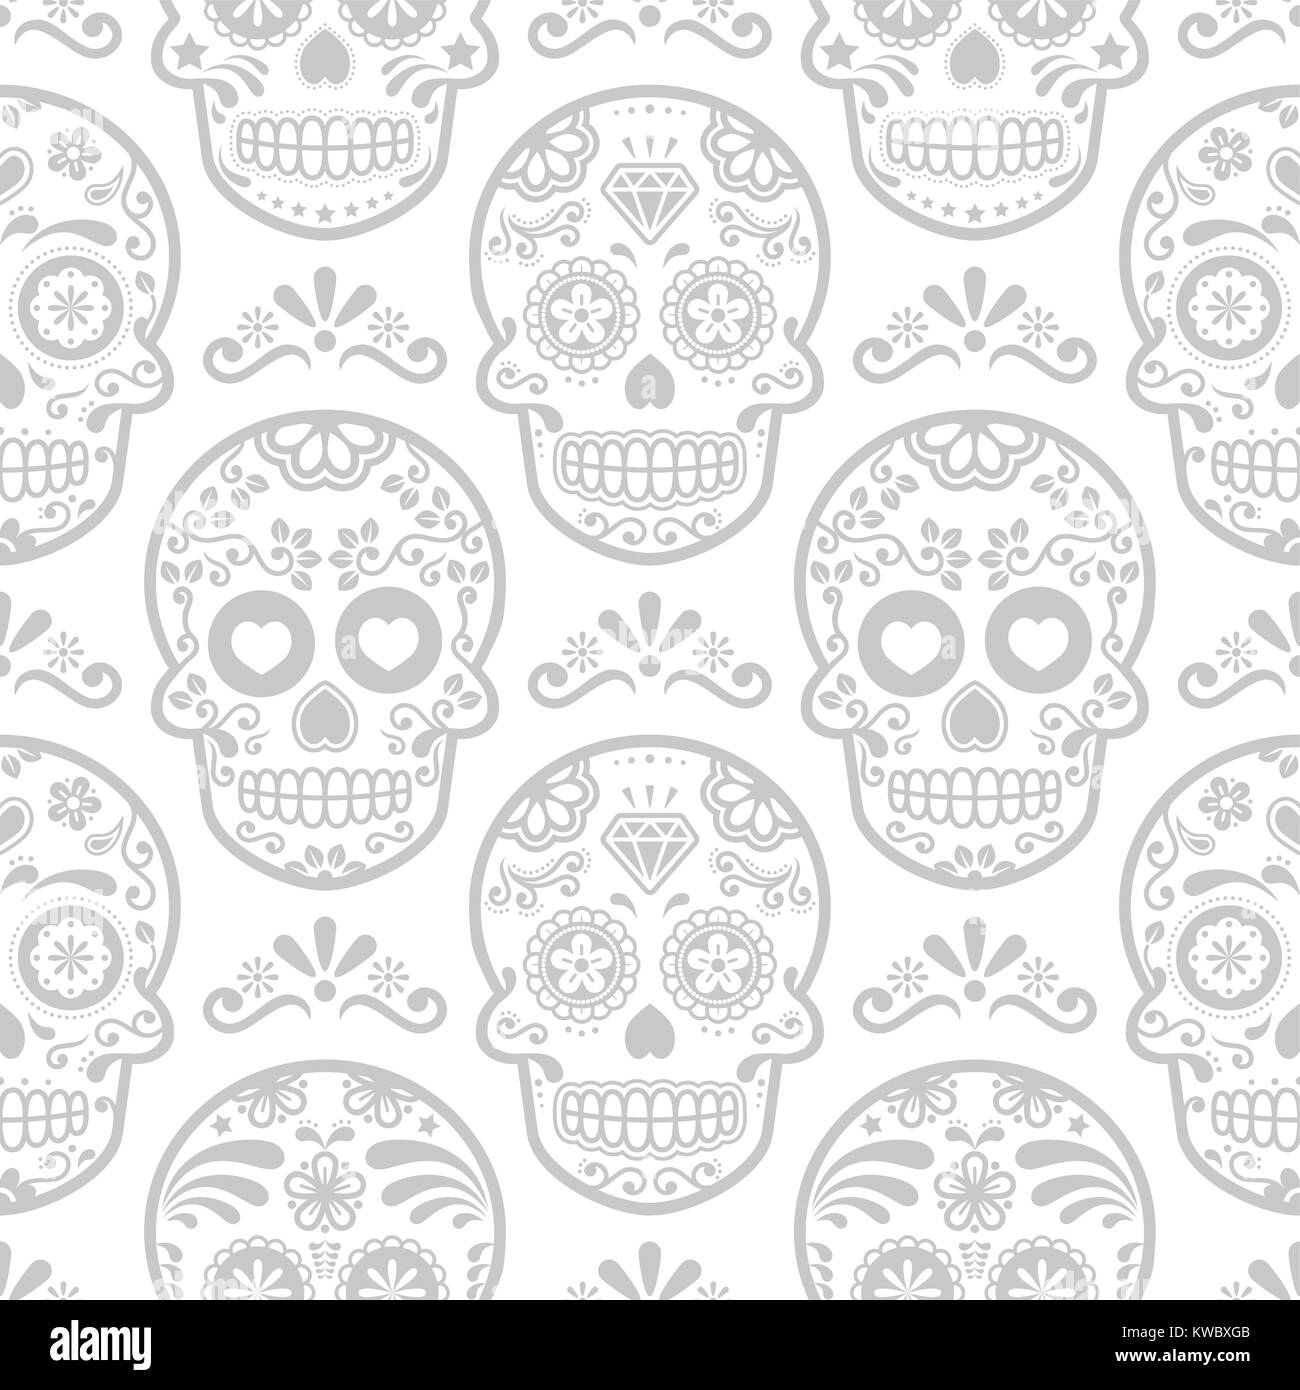 Mexican sugar skull vector seamless pattern, Halloween candy skulls background, Day of the Dead celebration Stock Vector